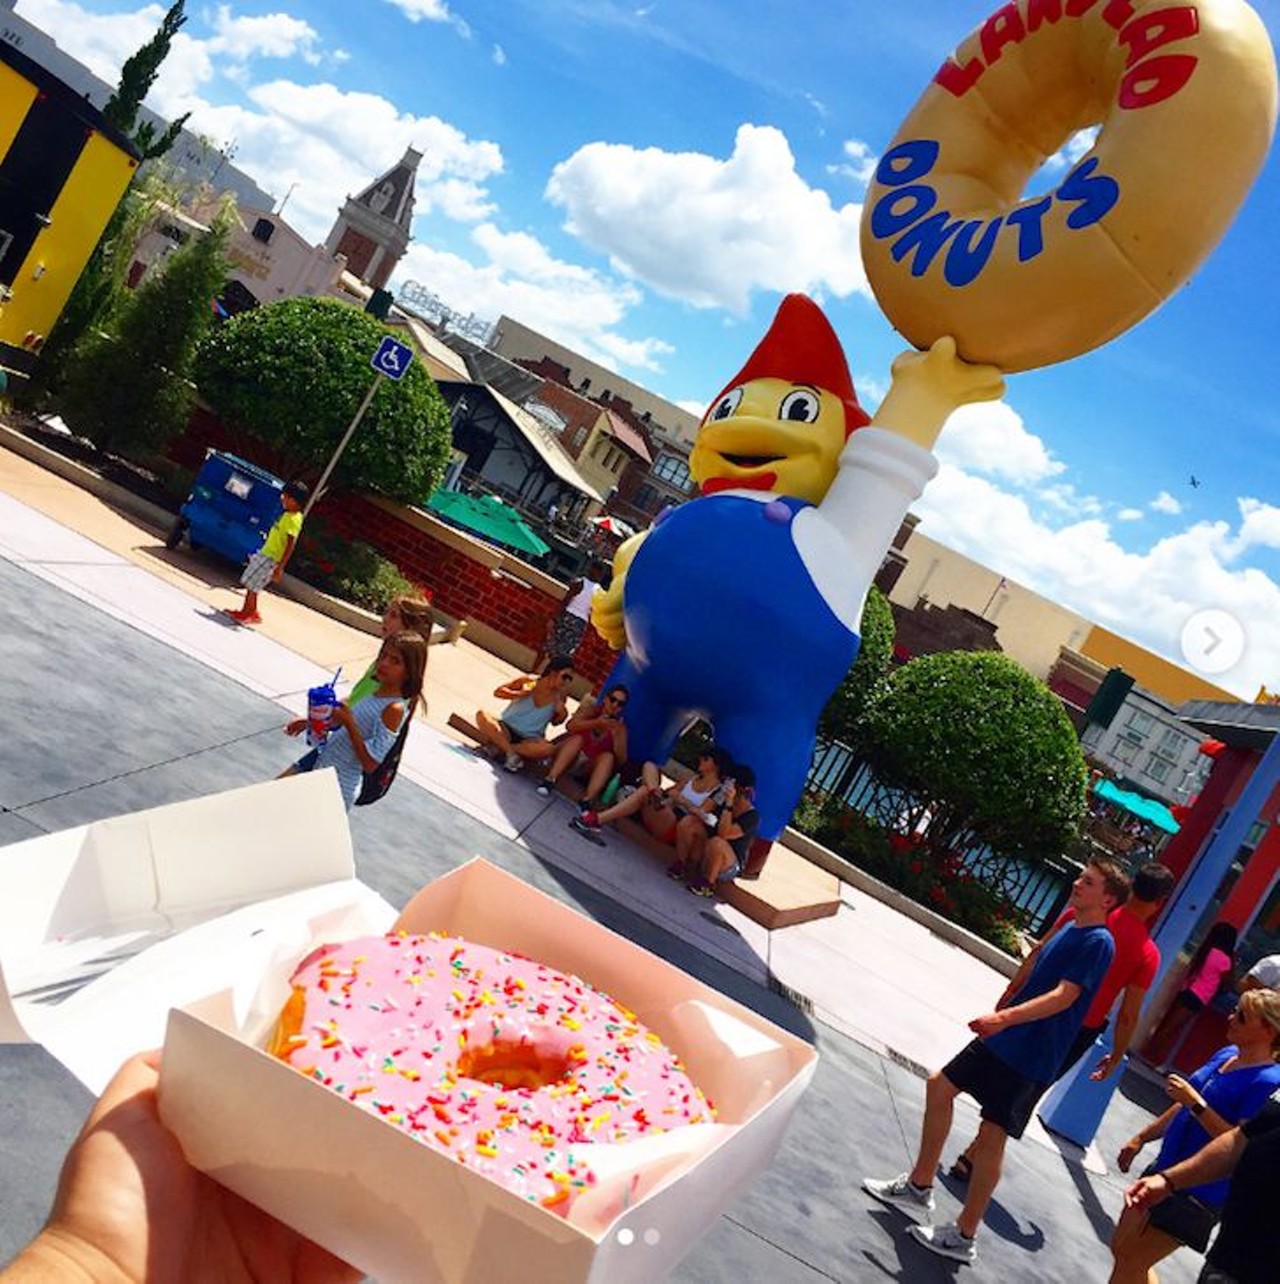 Lard Lad Donuts 
Address: 6000 Universal Blvd.
Located at Springfield, Home of the Simpsons within Universal Studios, Lard Lad Donuts offers the doughnut sandwich, made up of soft serve ice cream and a pink sprinkled doughnut. Add on a topping like Oreo or Reese&#146;s Pieces, and you&#146;ve got the perfect dessert for a hot day at the park.  
Photo via we_are_earthbound/Instagram